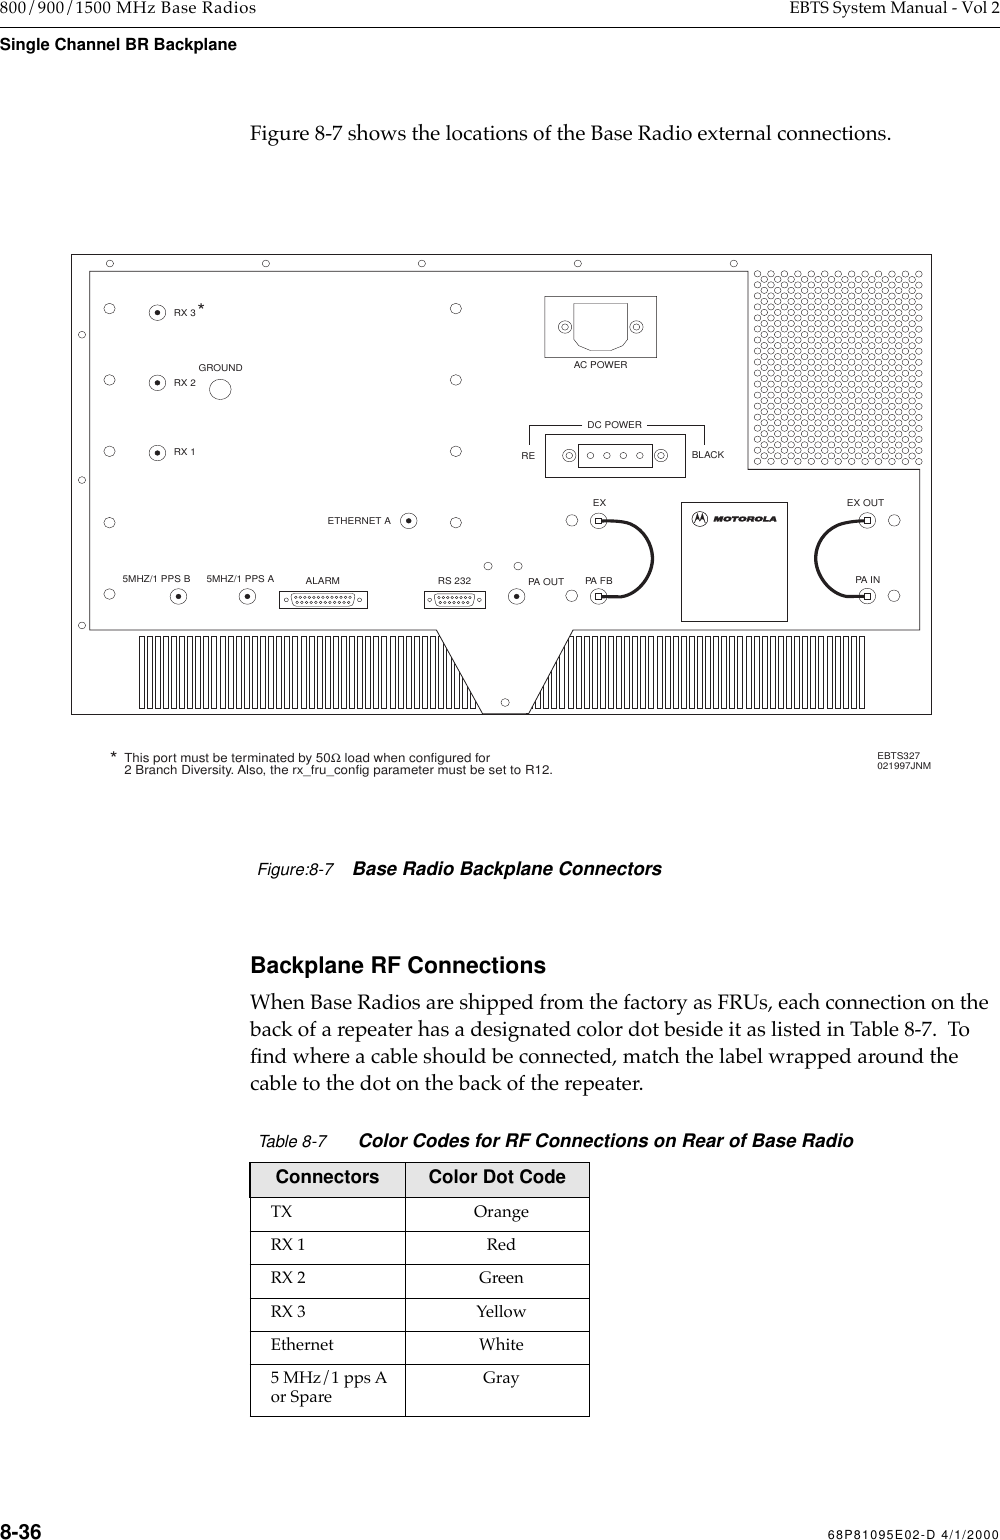 8-36 68P81095E02-D 4/1/2000800/900/1500 MHz Base Radios EBTS System Manual - Vol 2Single Channel BR BackplaneFigure 8-7 shows the locations of the Base Radio external connections.Backplane RF ConnectionsWhen Base Radios are shipped from the factory as FRUs, each connection on the back of a repeater has a designated color dot beside it as listed in Table 8-7.  To Þnd where a cable should be connected, match the label wrapped around the cable to the dot on the back of the repeater.Table 8-7Color Codes for RF Connections on Rear of Base RadioConnectors Color Dot CodeTX OrangeRX 1 RedRX 2 GreenRX 3 YellowEthernet White5 MHz/1 pps A or SpareGrayEX OUTPA INEXPA FBDC POWERAC POWERRS 232ALARM5MHZ/1 PPS BRX 1RX 2RX 35MHZ/1 PPS AETHERNET APA OUTGROUNDEBTS327021997JNMRE BLACKThis port must be terminated by 50Ω load when configured for2 Branch Diversity. Also, the rx_fru_config parameter must be set to R12.**Figure:8-7Base Radio Backplane Connectors